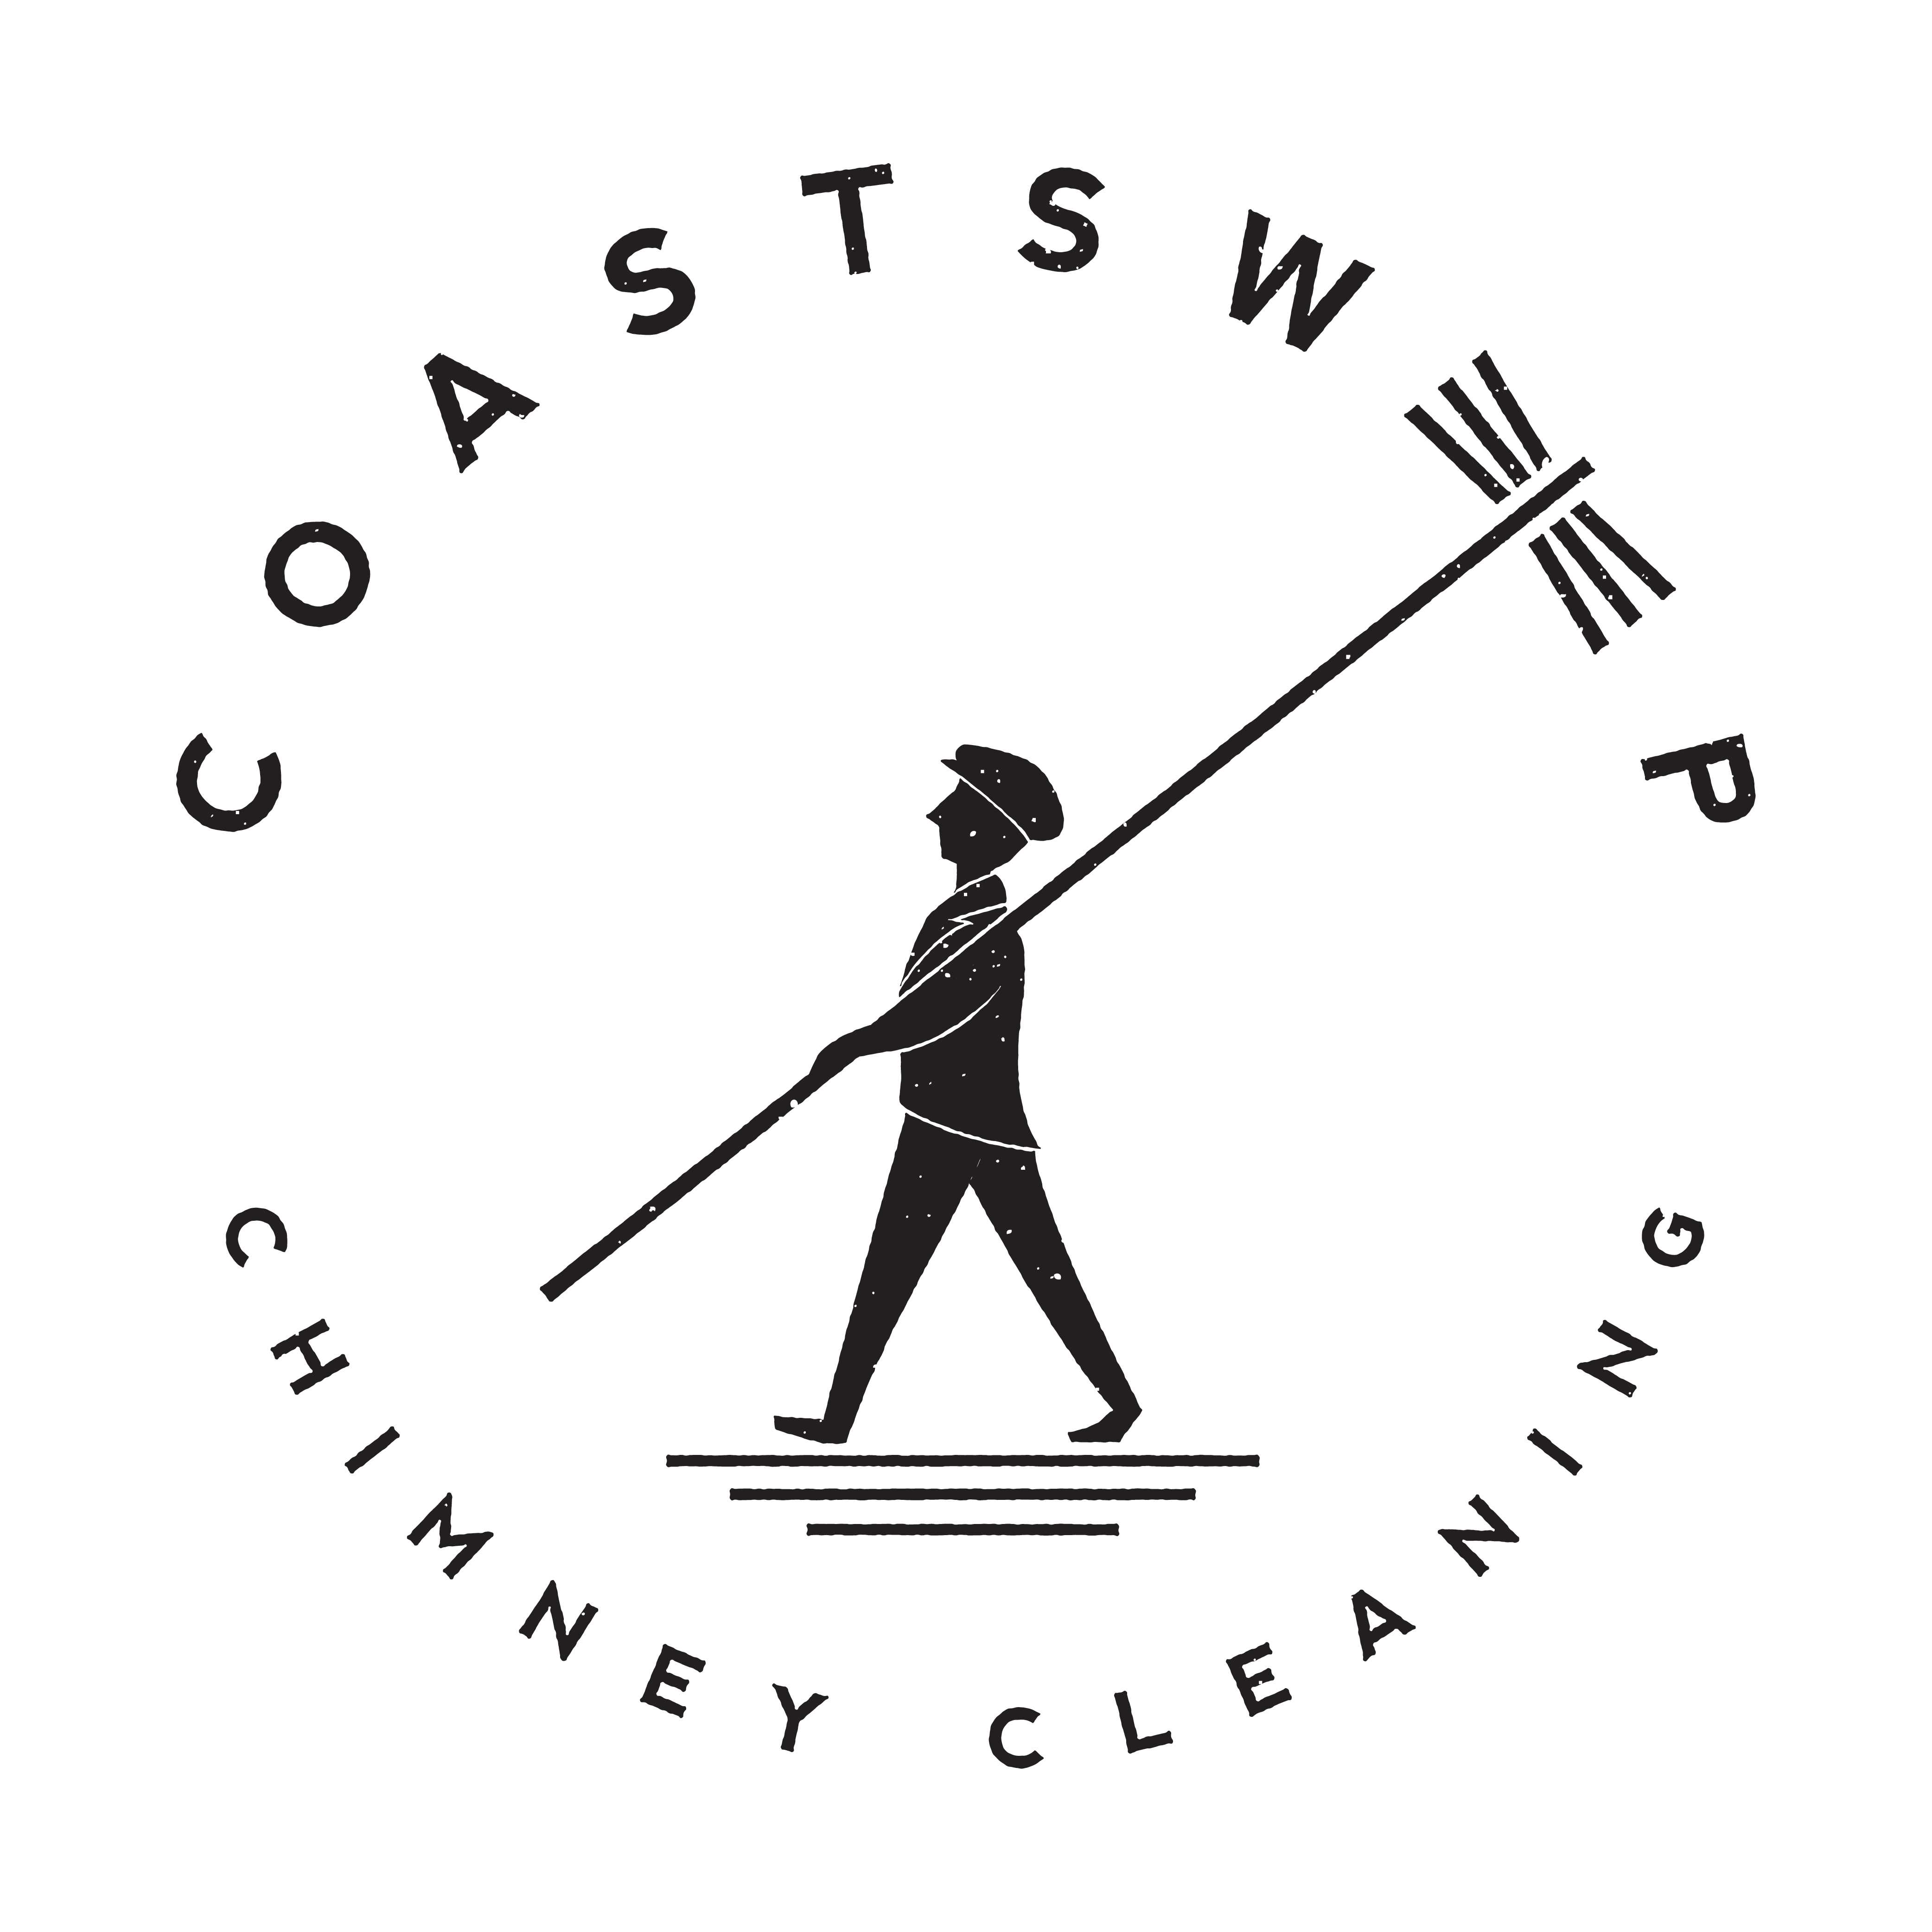 coast sweep chimney cleaning - in circle wrapped around chimney cleaner cartoon